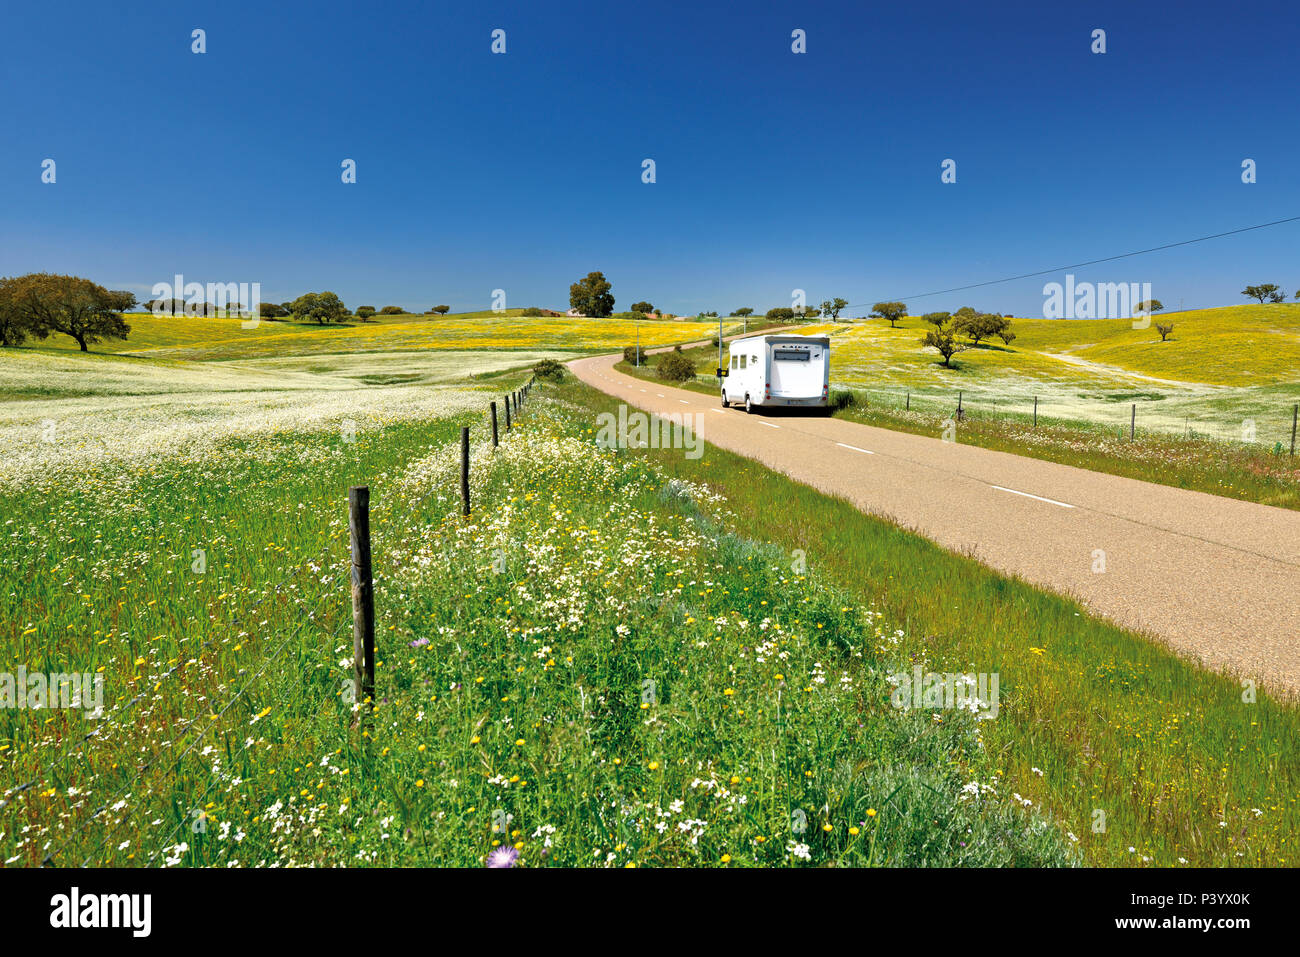 Motor home  on lonley street surrounded by wide fields with yellow  flowers and oak trees Stock Photo